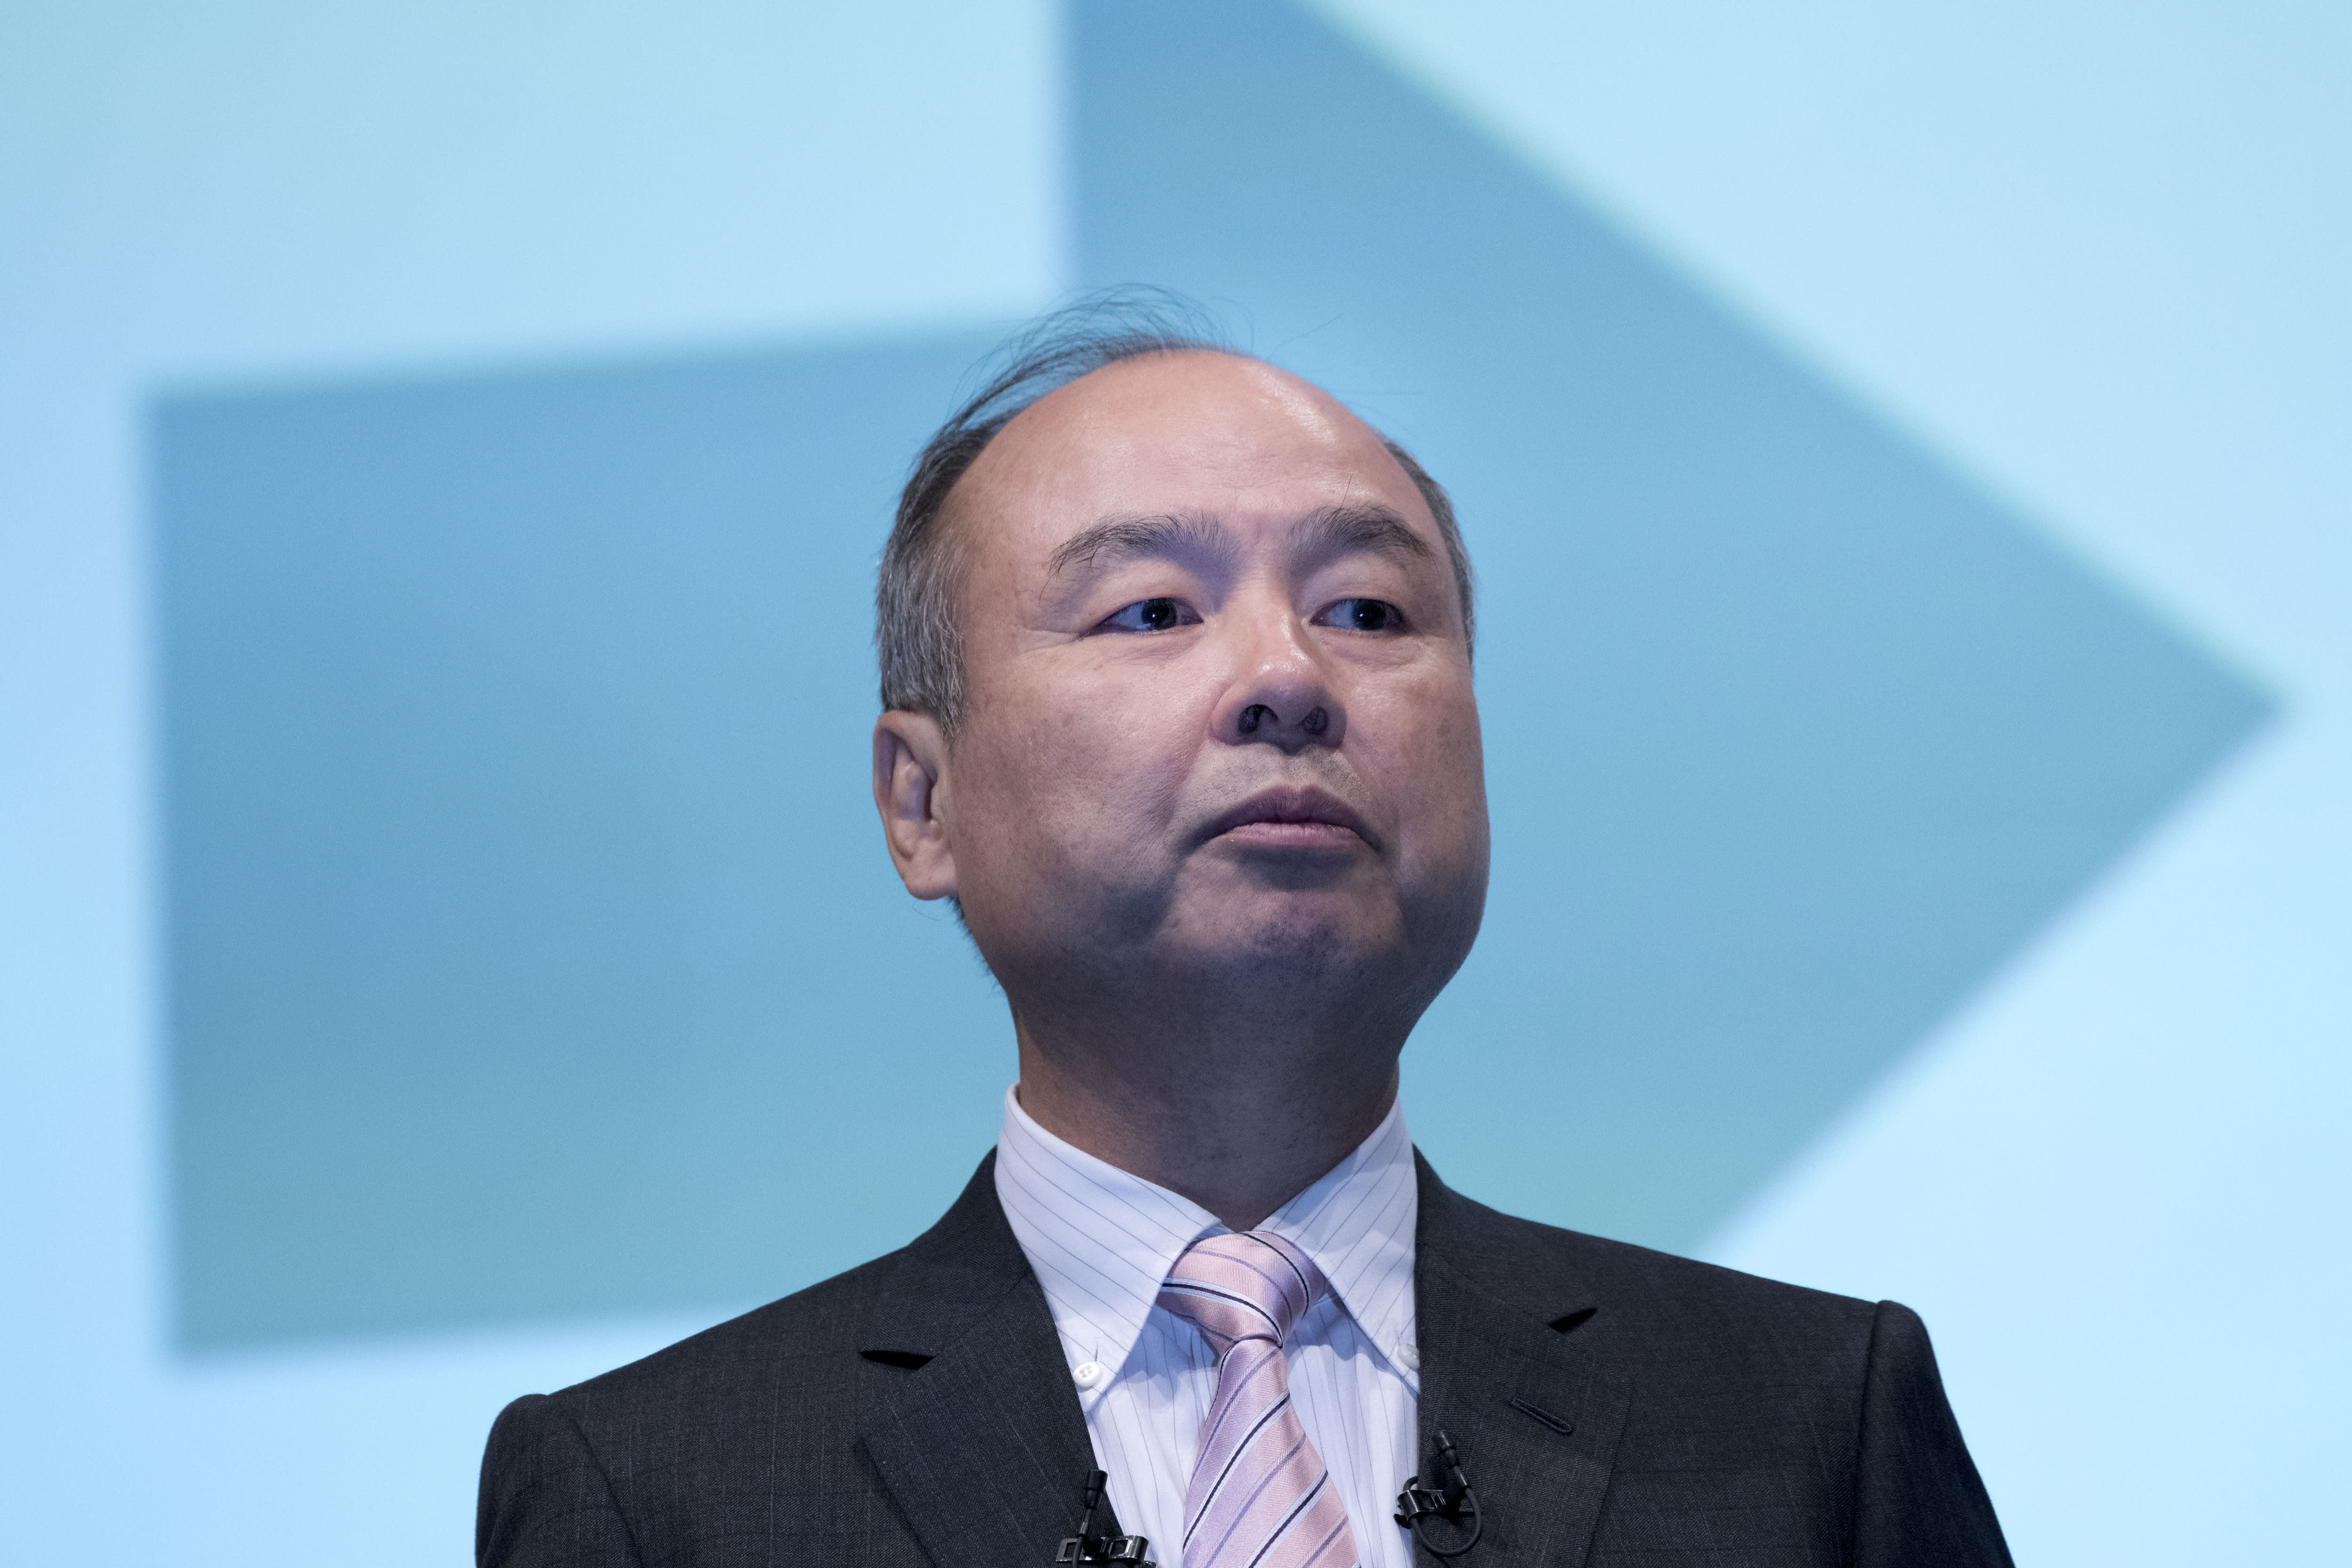 SoftBank’s long-term investment strategy may benefit in the current interest rate environment, says CLSA